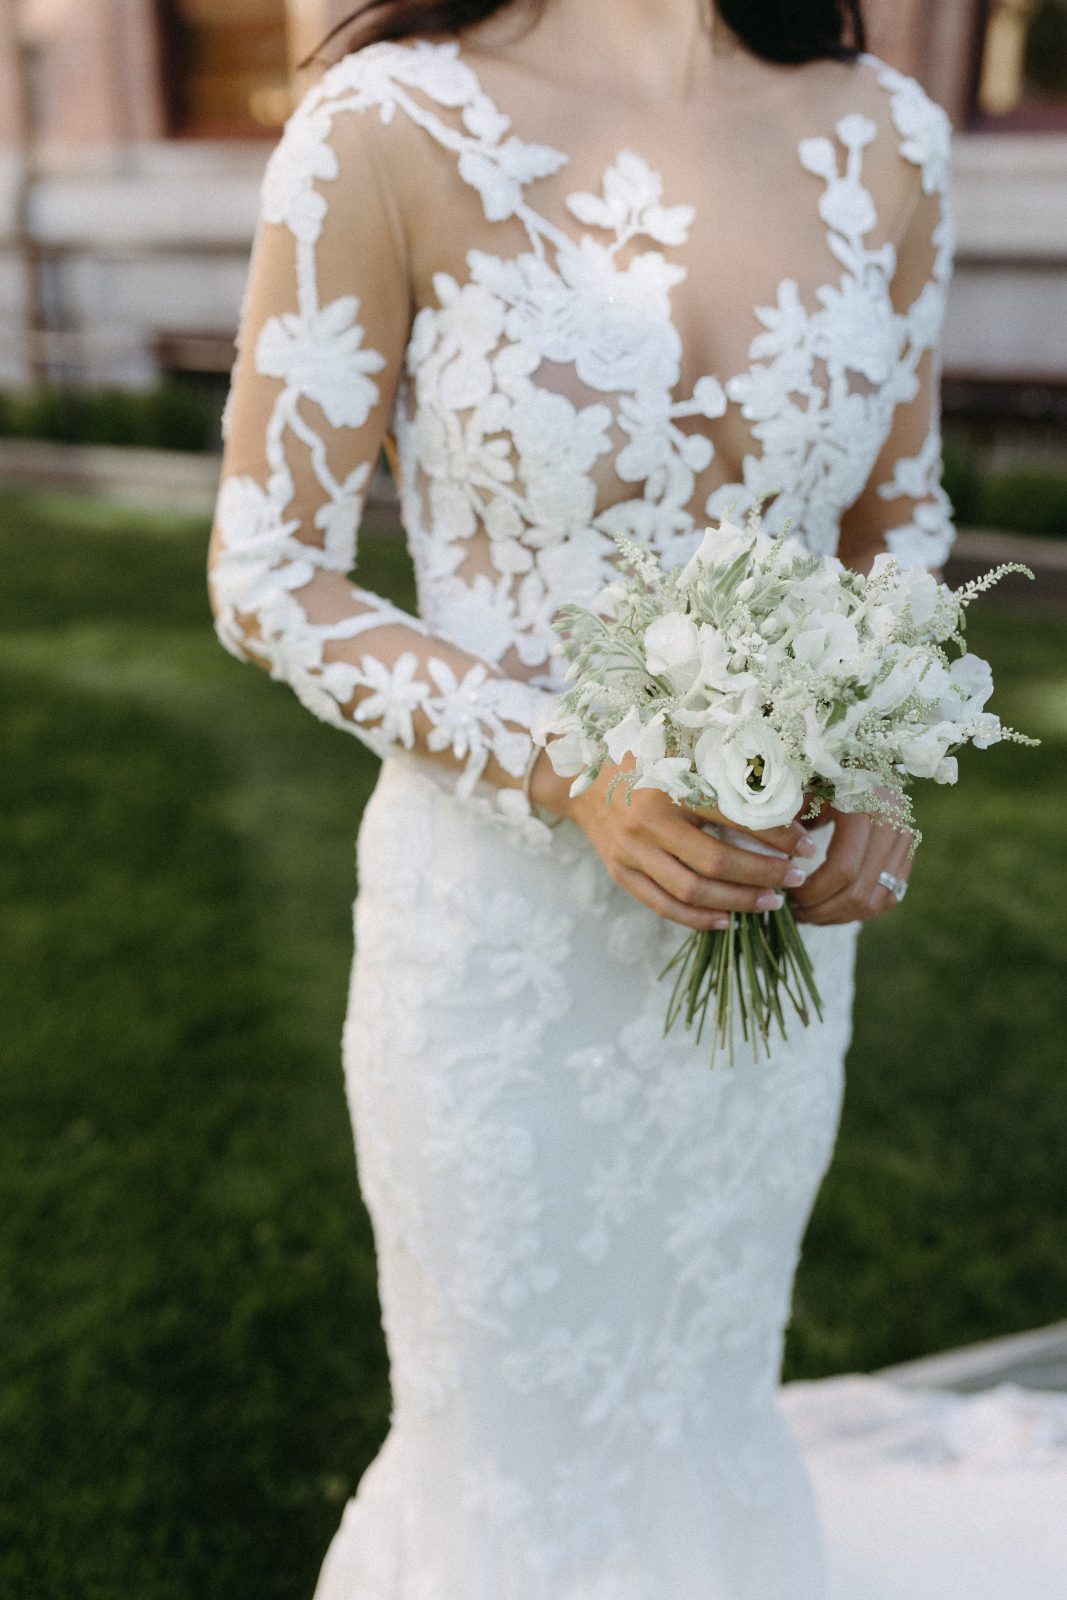 A close up of a beautiful Calyx bride's ornate gown, holding her delicate white posy bouquet